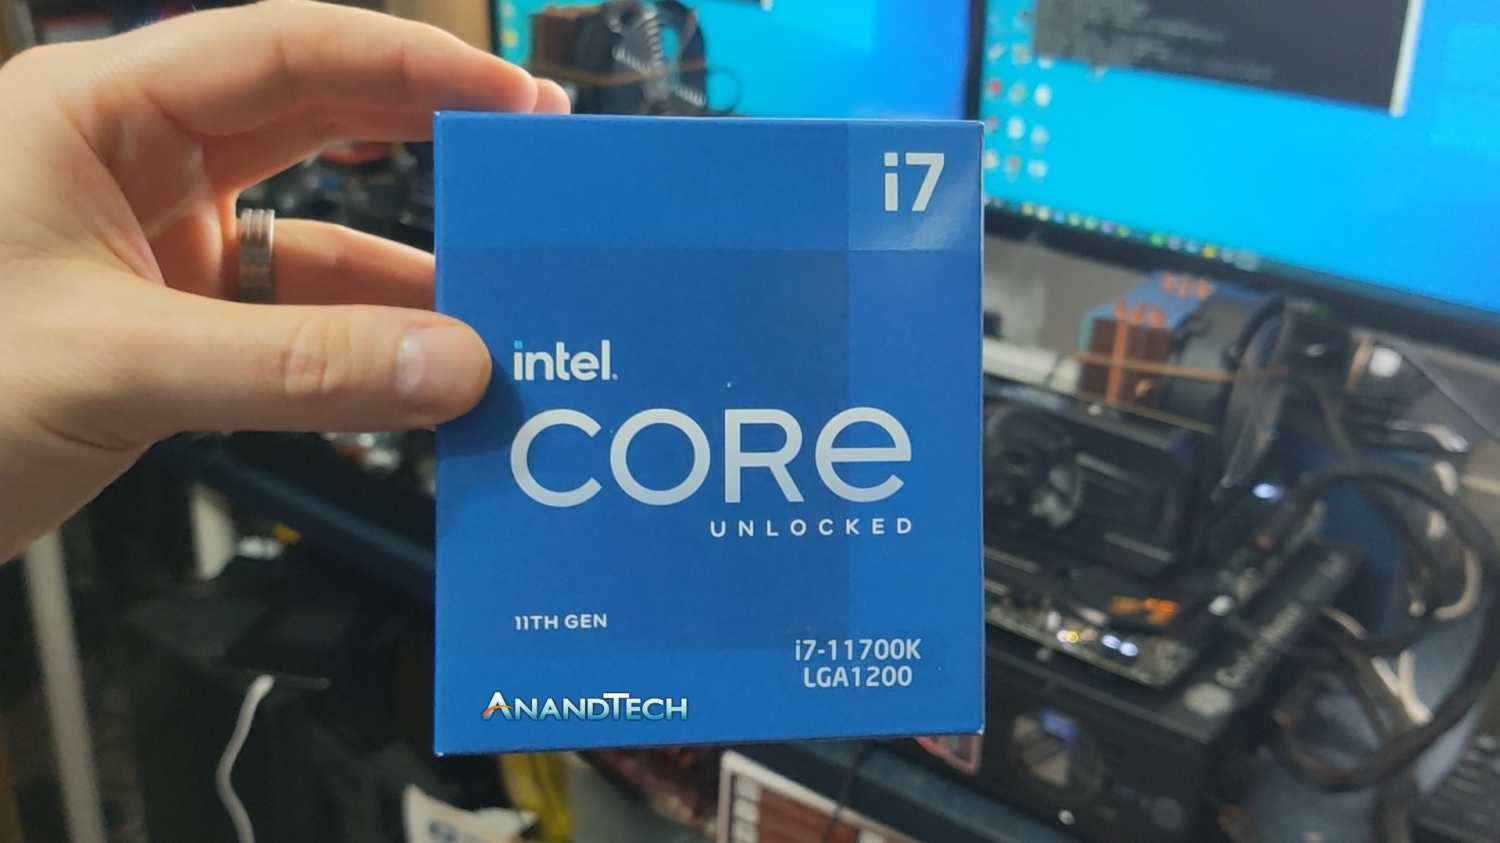 Intel Core i7-11700K review uploaded, Rocket Lake-S gets benched 